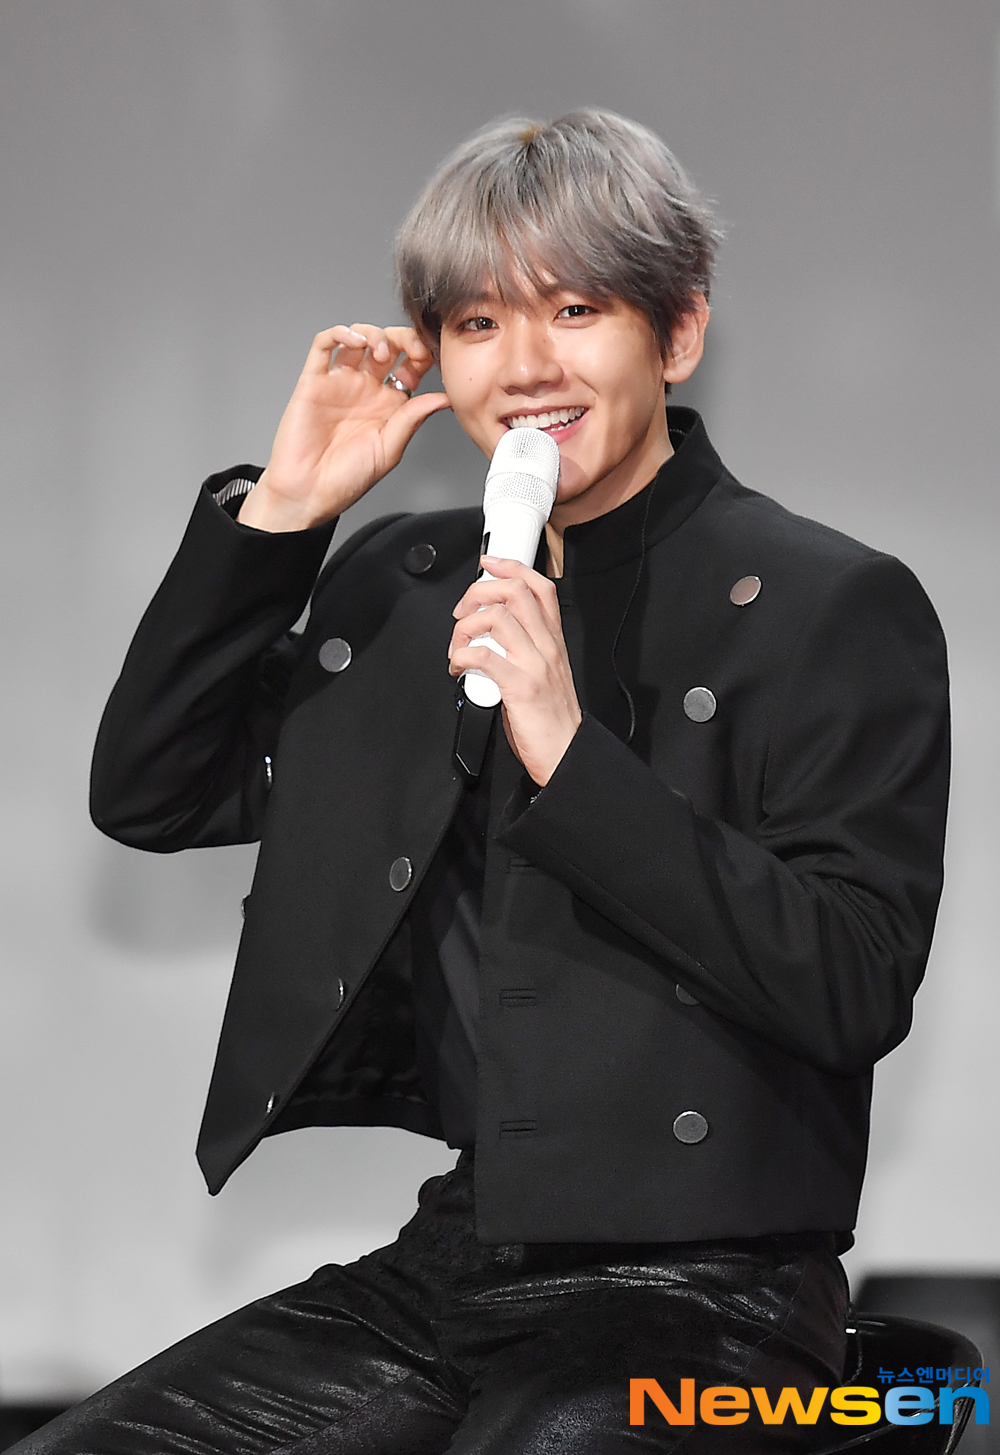 Exo Baekhyuns first solo album showcase was held at SAC Art Hall in Samsung-dong, Gangnam-gu, Seoul on July 10Baekhyun is responding to the interview.Baekhyuns first mini-album City Lights will be released today at 6 p.m. on various music sites, including the title song UN Village (UN Village), Stay Up (Stay Up), Betcha (Betcha), Ice Queen (Ice Queen), Diamond (Diamond),  Psycho (Psycho) is composed of six songs, and you can meet Baekhyuns outstanding vocals and sensual music worldexpressiveness